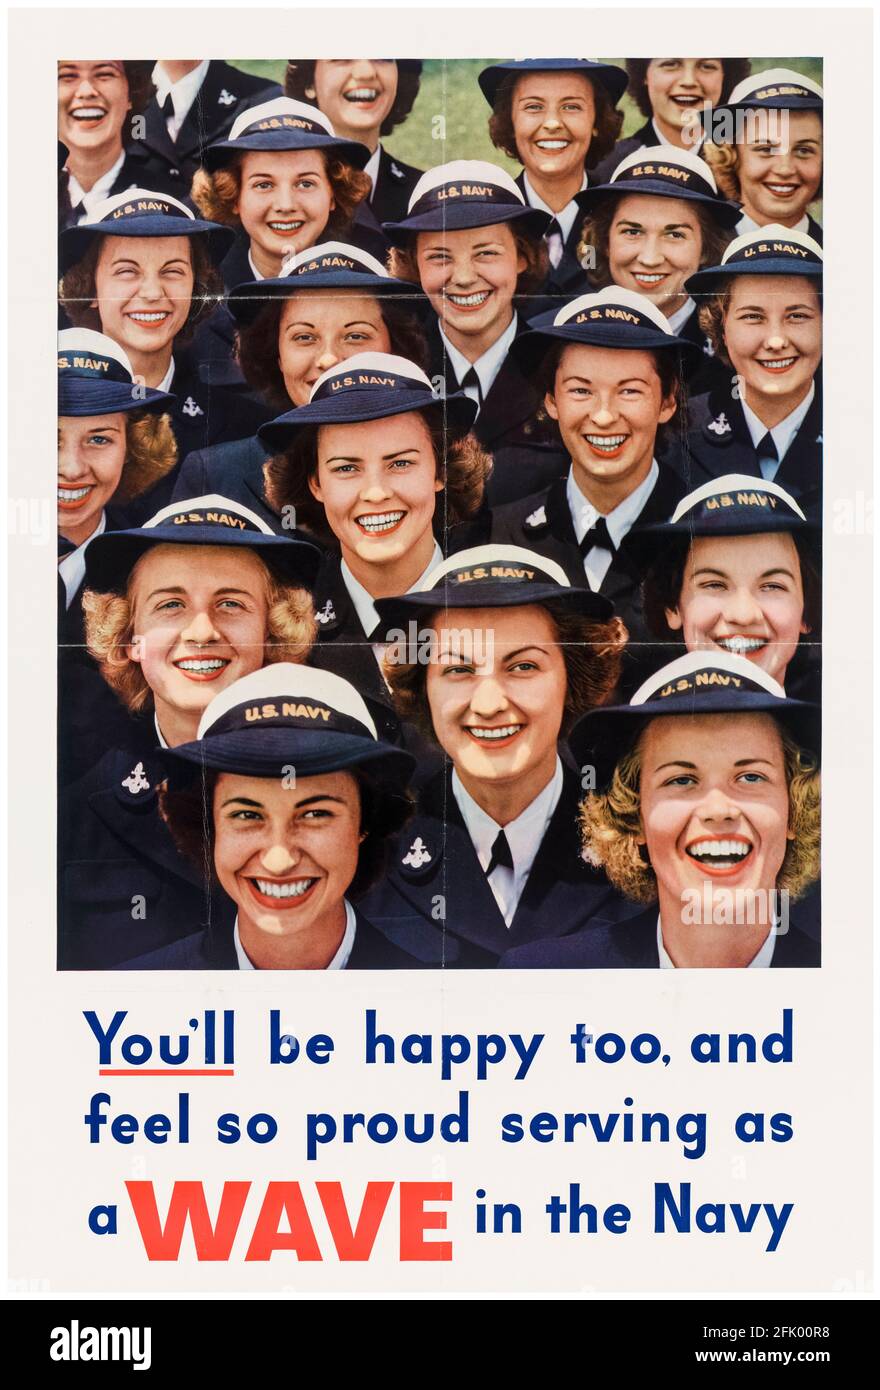 American, WW2 female recruitment poster: Group of WAVE recruits, WAVES, (US Navy), 1941-1945 Stock Photo